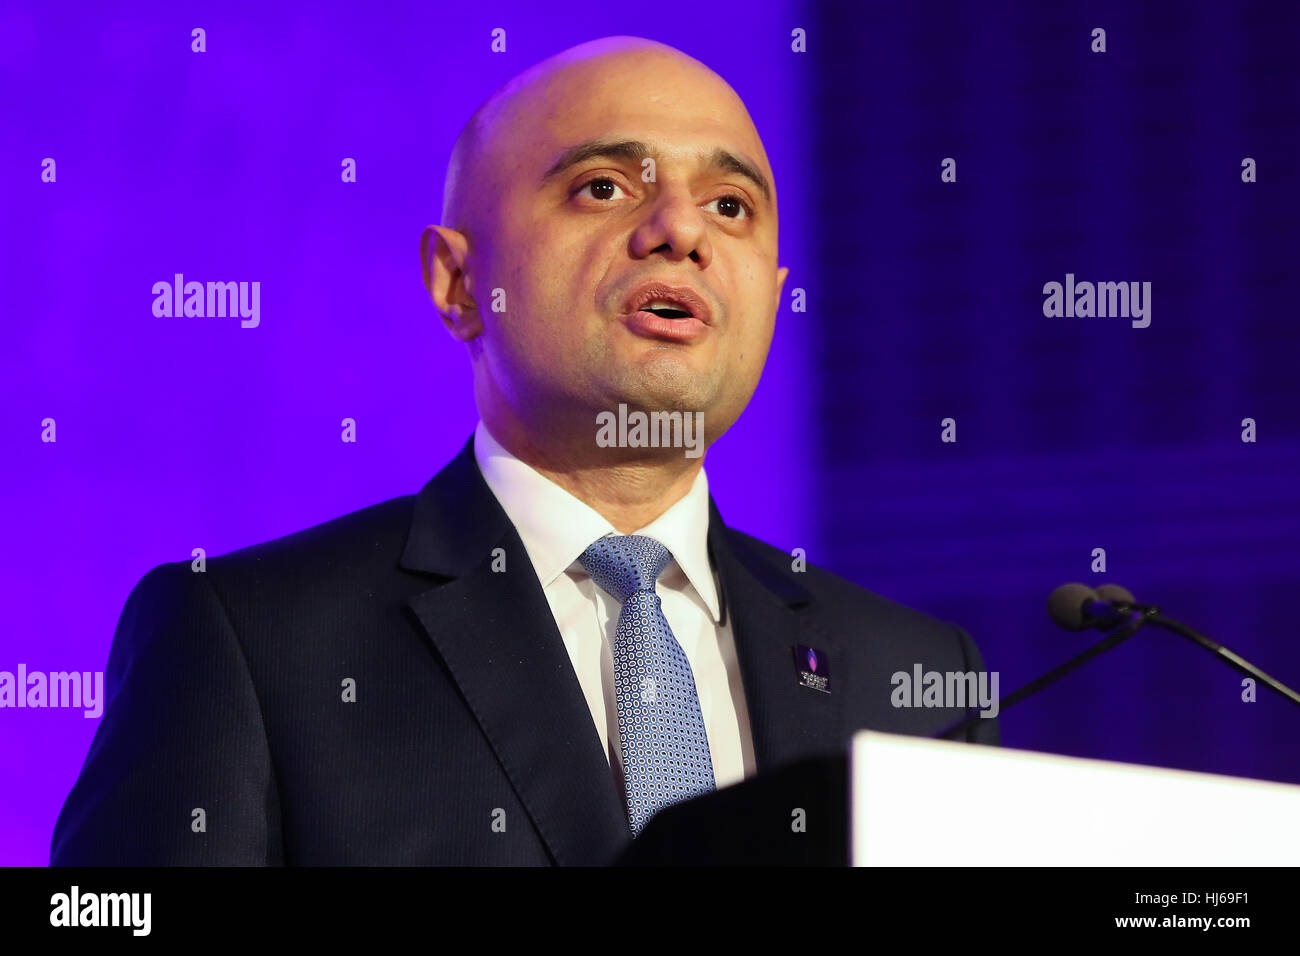 London, UK. 26th Jan, 2017. QEII Conference centre. Communities Secretary of State Sajid Javid. Over 500 people including senior politicians, dignitaries and religious leaders attend Holocaust Memorial Day Service to remember the millions of people murdered in the Holocaust, under Nazi Persecution and in the subsequent genocides in Cambodia, Rwanda, Bosnia and Darfur. 27 January marks the liberation of Auschwitz-Birkenau, the largest Nazi death camp. ‘The theme for Holocaust Memorial Day 2017 is ‘How can life go on?’. Credit: Dinendra Haria/Alamy Live News Stock Photo